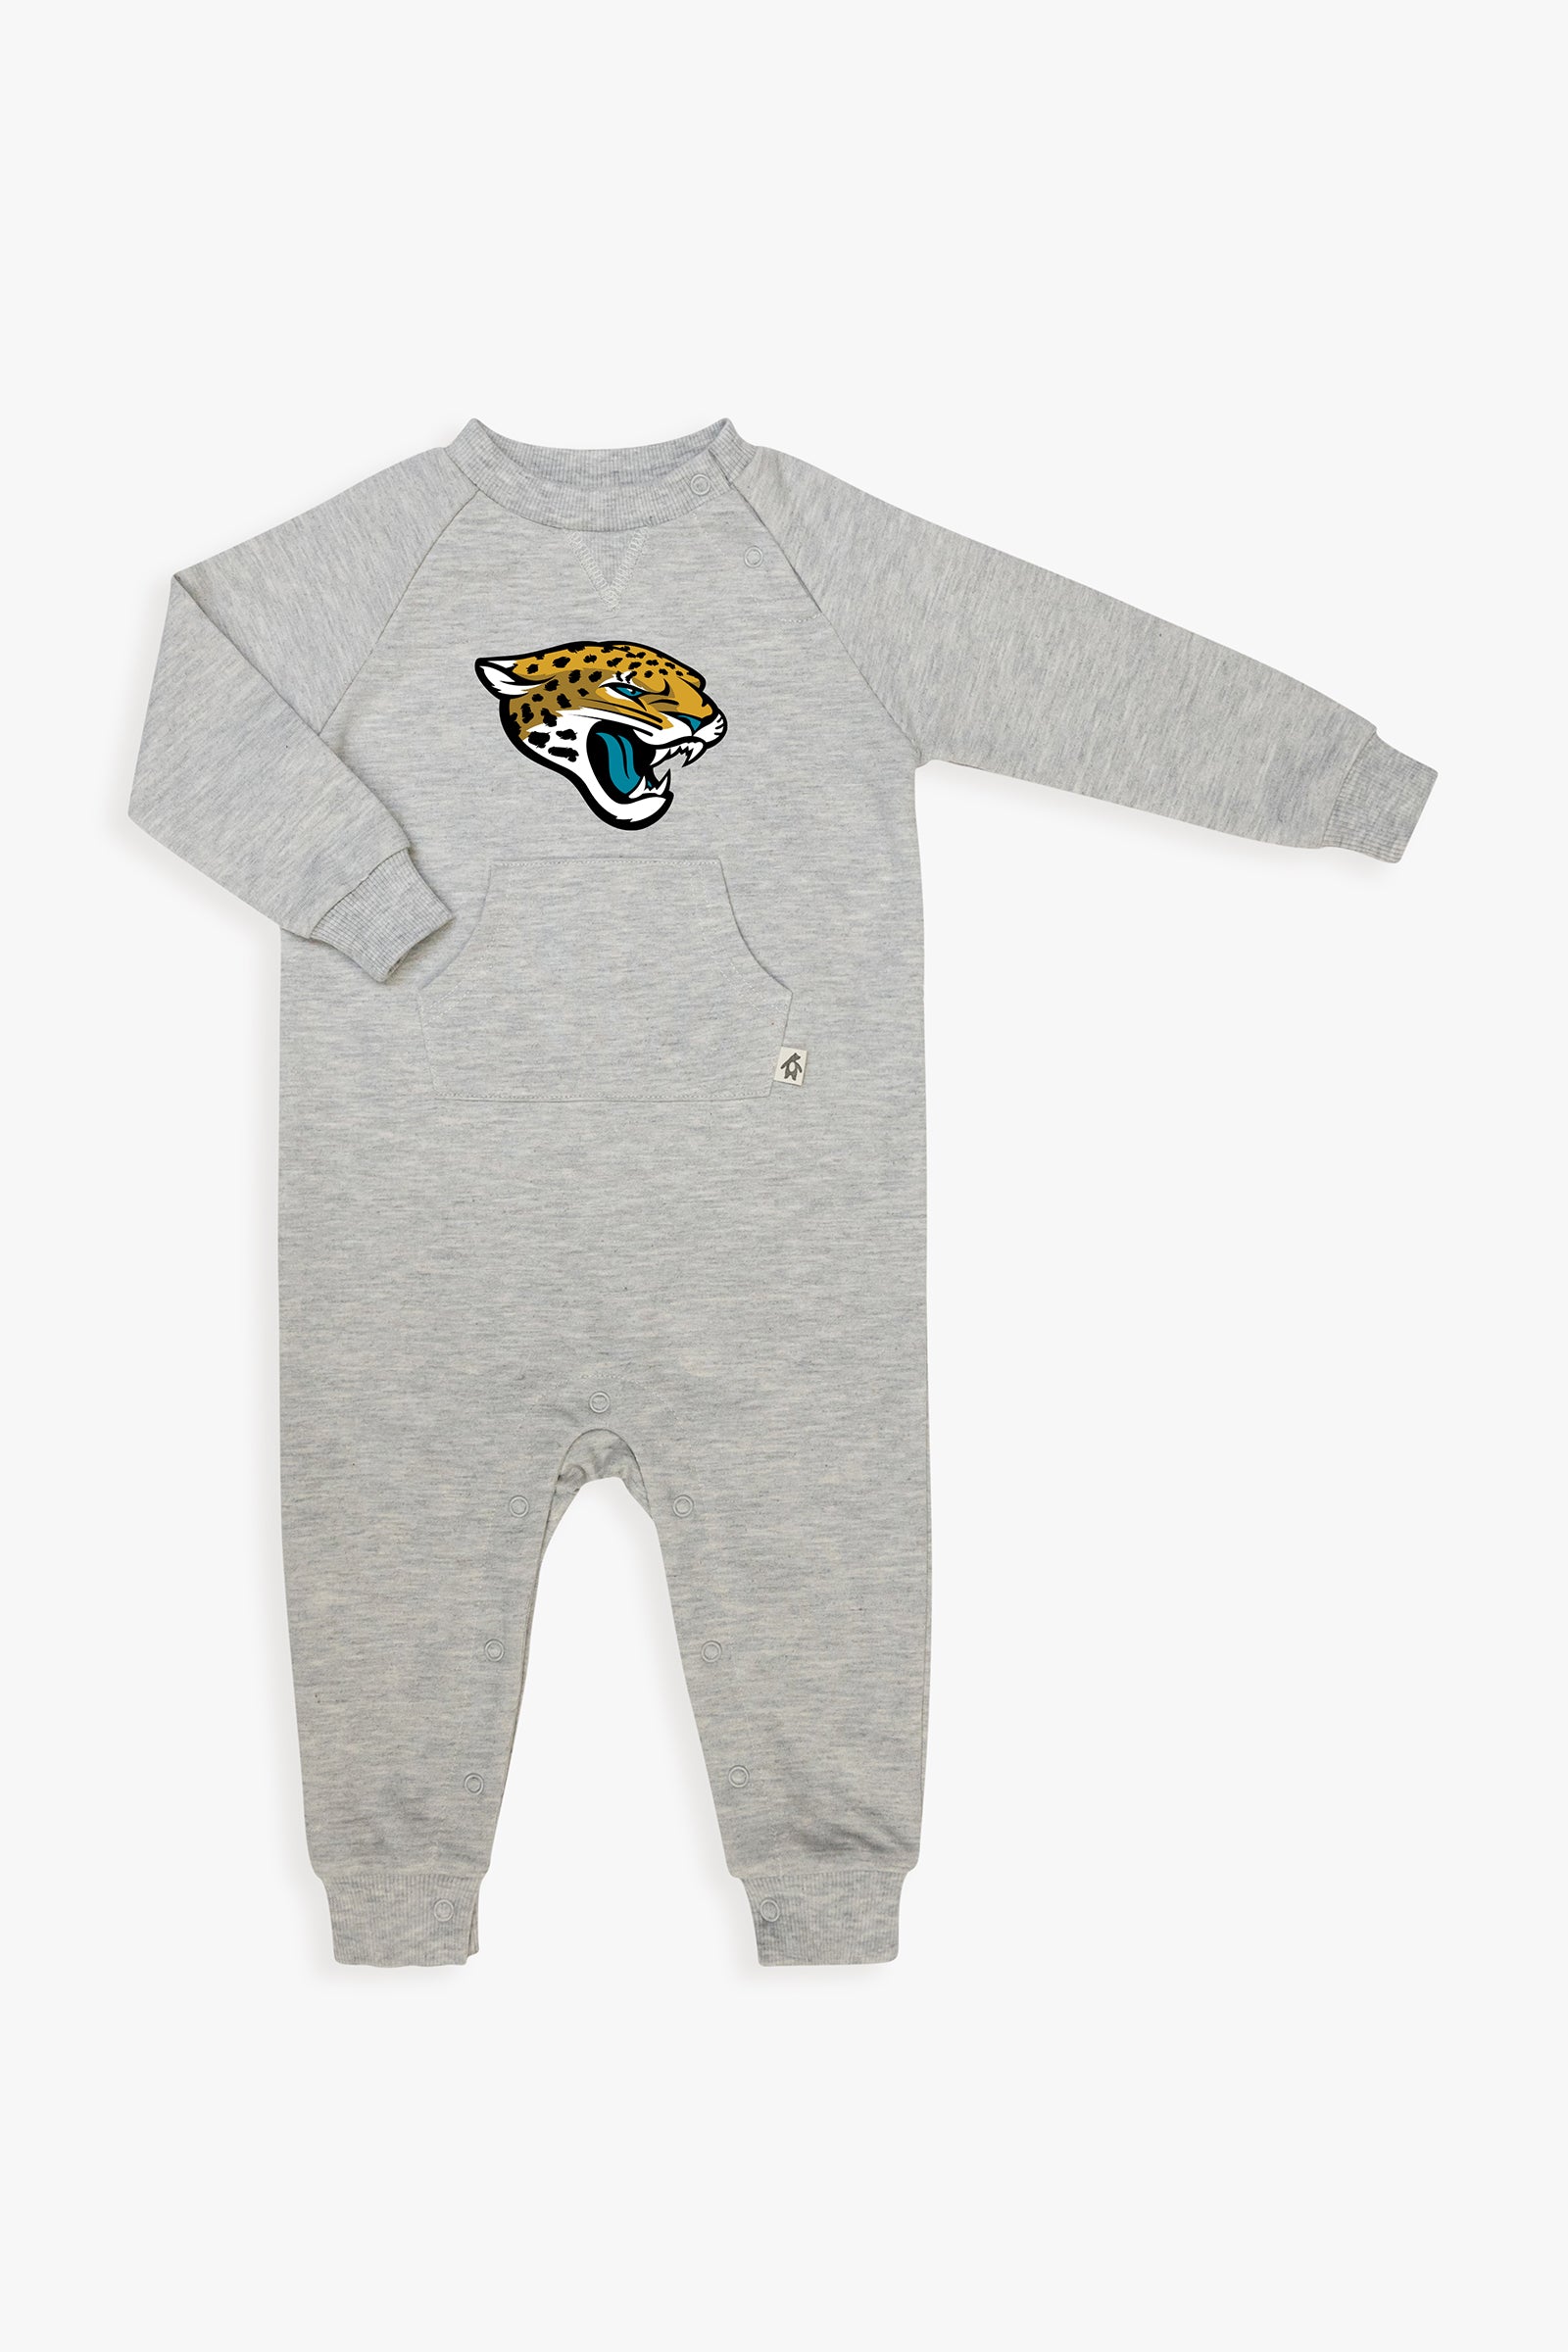 NFL Toddler French Terry Jumpsuit in Grey